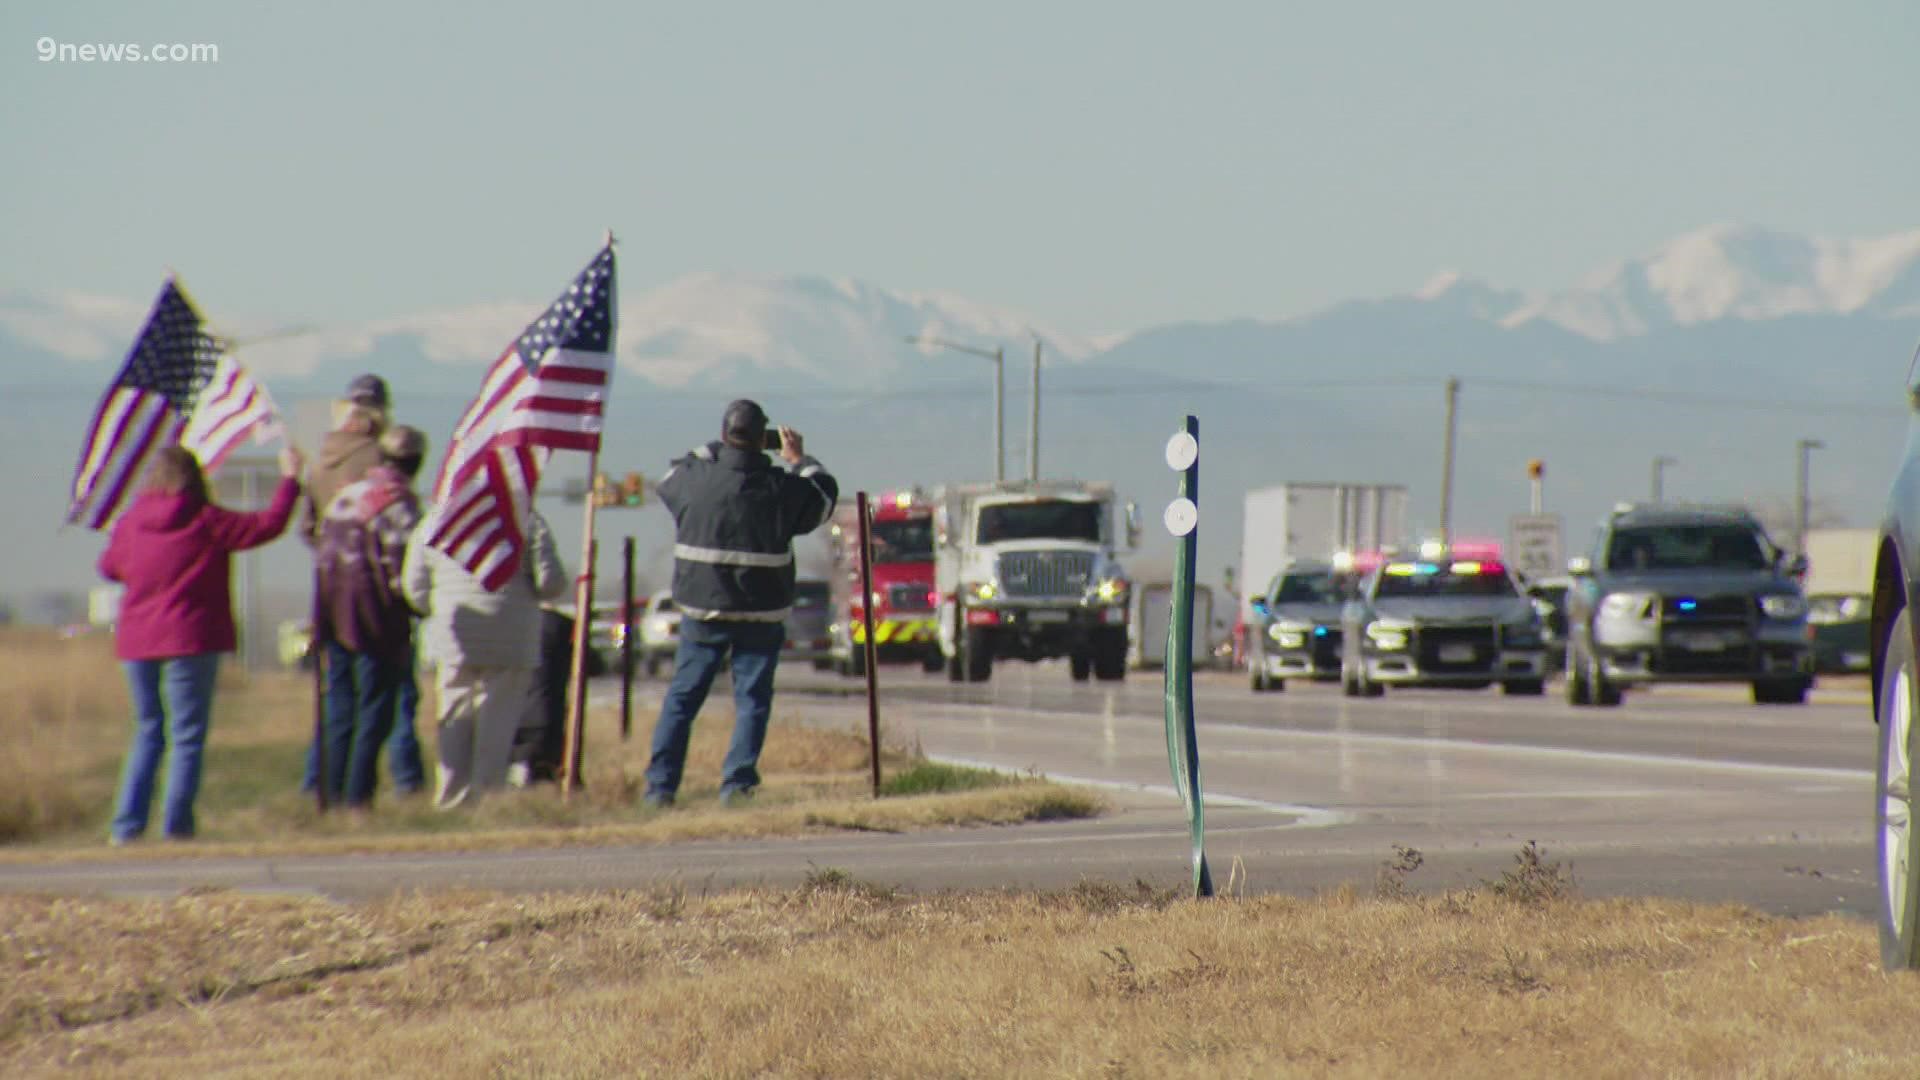 In the middle of a tragedy, the family of Marc Thor Olson found what they describe as the "best of America" when they came to Colorado for a funeral procession.